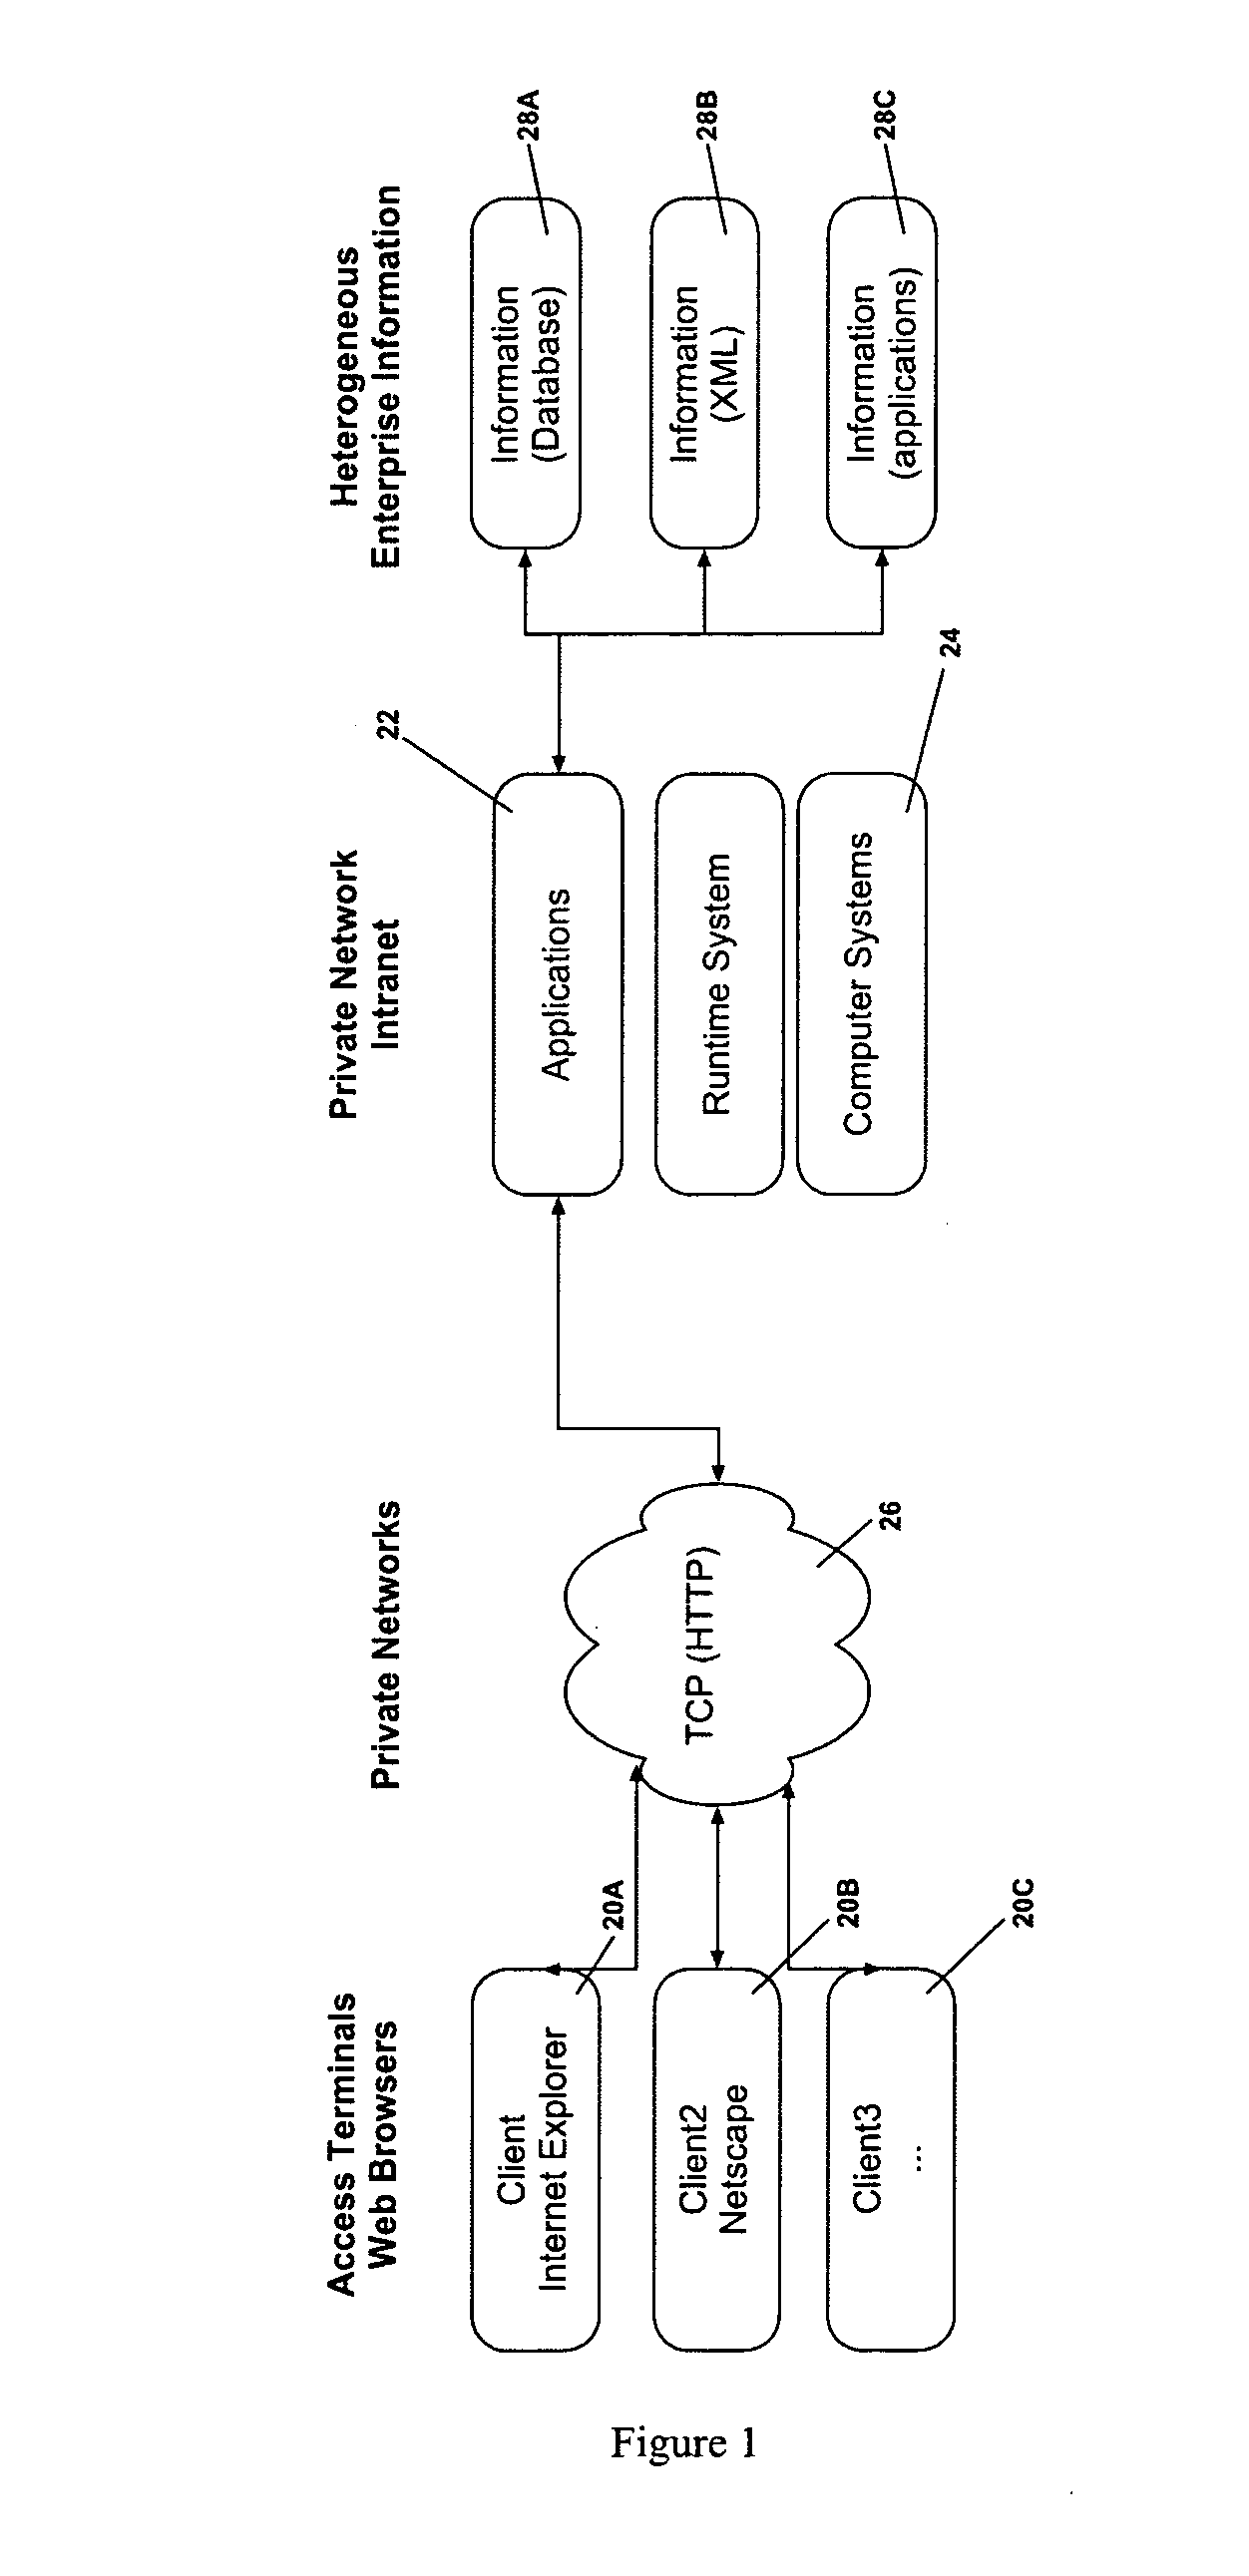 Efficient system and method for running and analyzing multi-channel, multi-modal applications